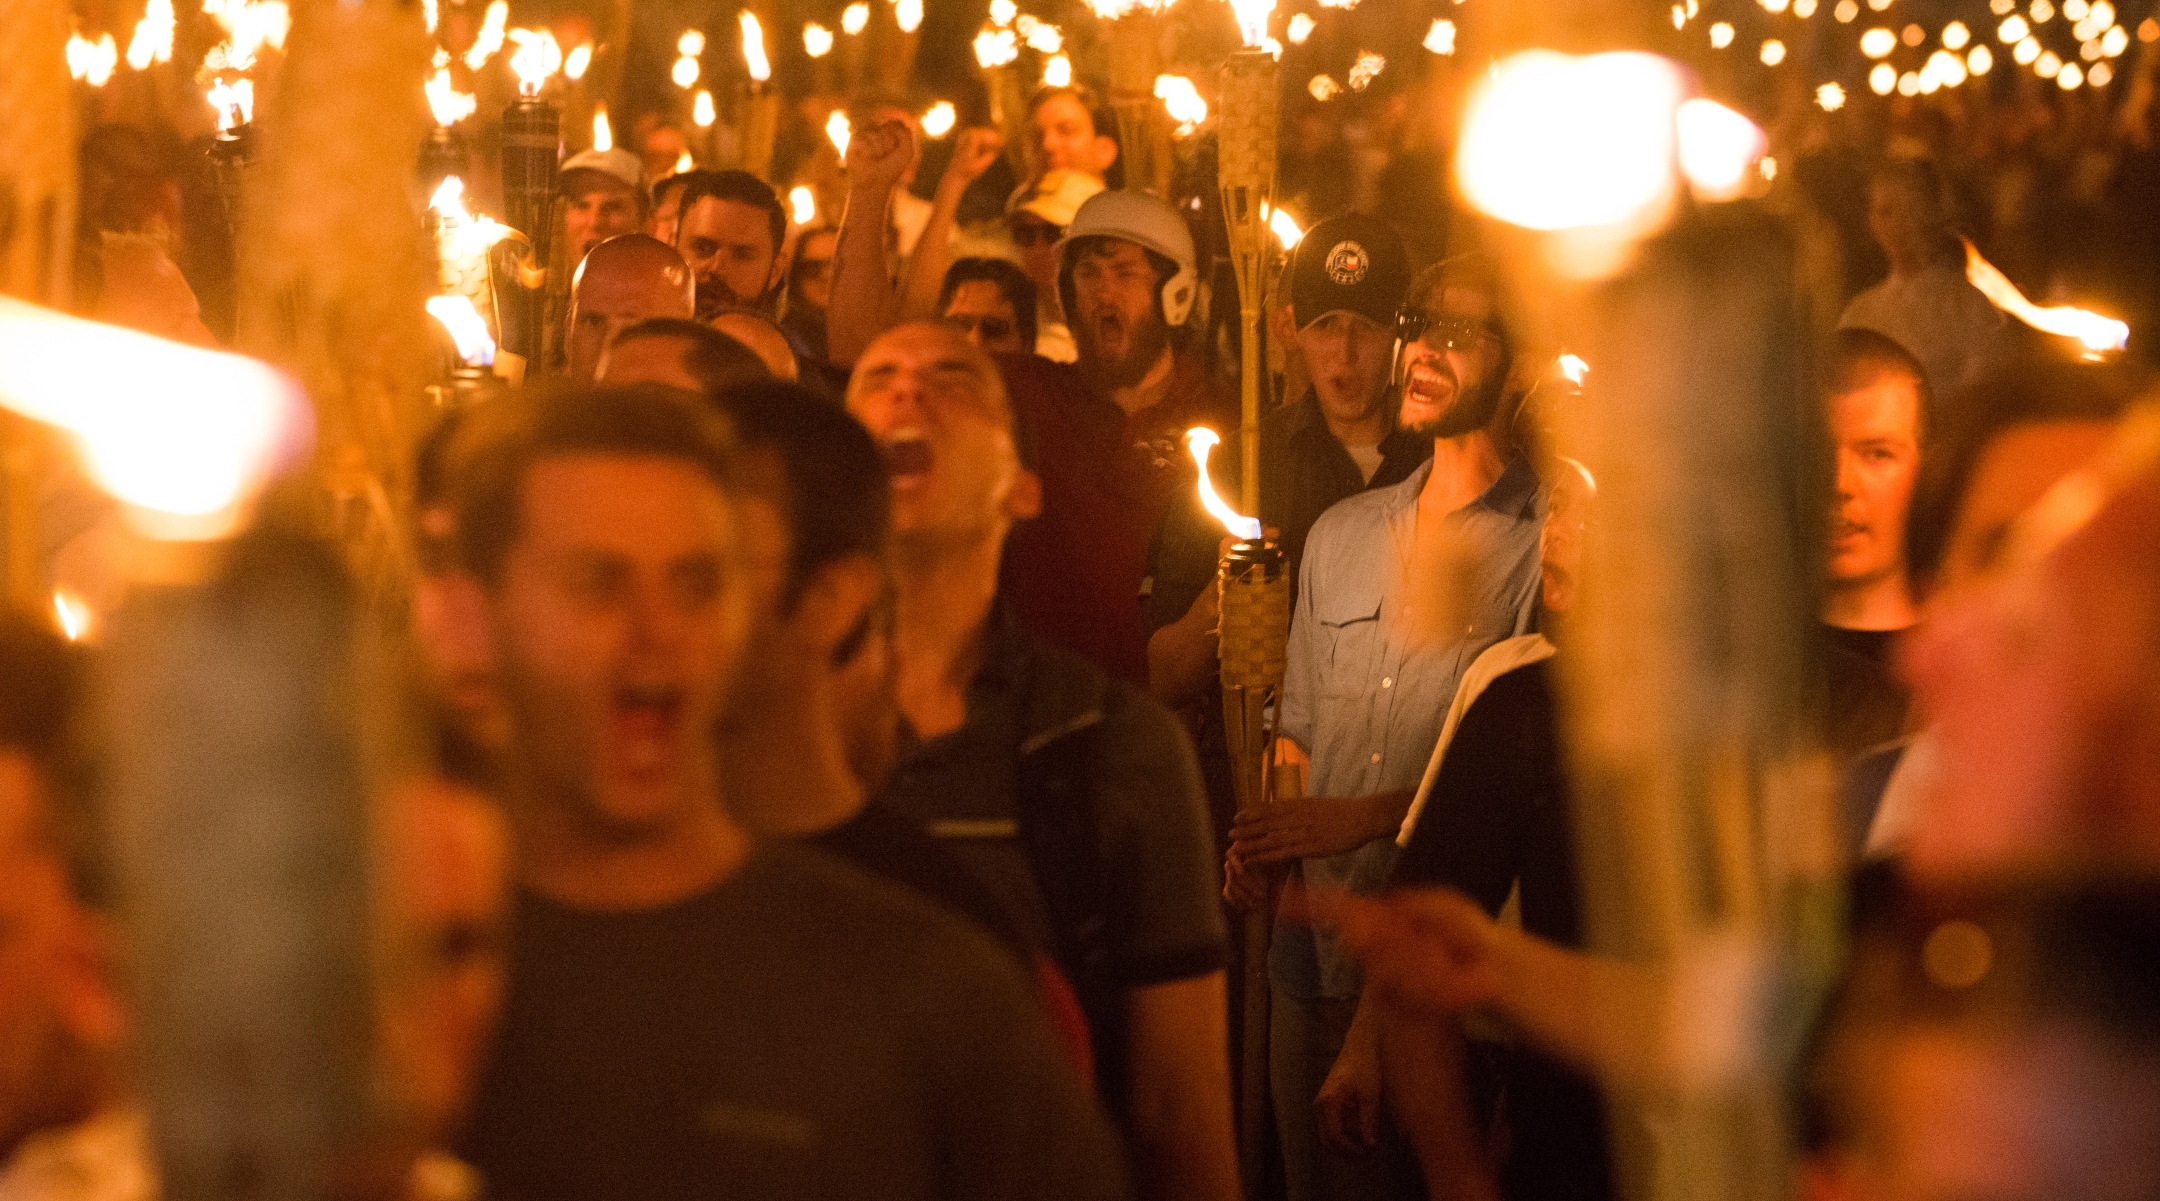 Neo-Nazis and white Supremacists take part in a march the night before the Unite the Right rally in Charlottesville, Va., Aug. 11, 2017. (Zach D Roberts/NurPhoto via Getty Images)